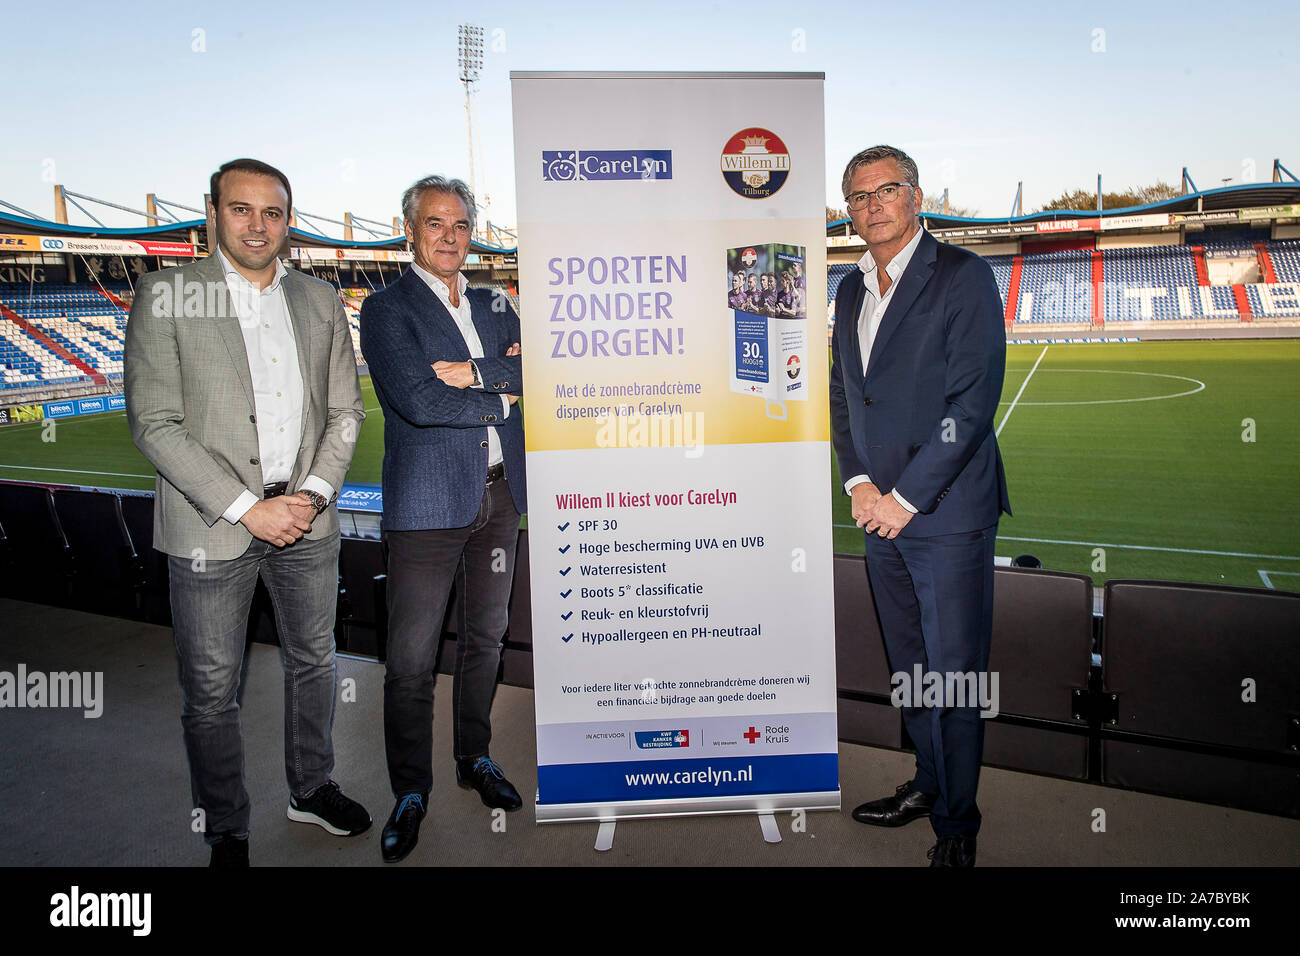 Tilburg - CareLyn 31-10-2019. Koning Willem II stadion. Buitensport, Voetbal. Willem II is the first BVO that concerns about skin cancer and signs a contract with CareLyn. Credit: Pro Shots/Alamy Live News Stock Photo